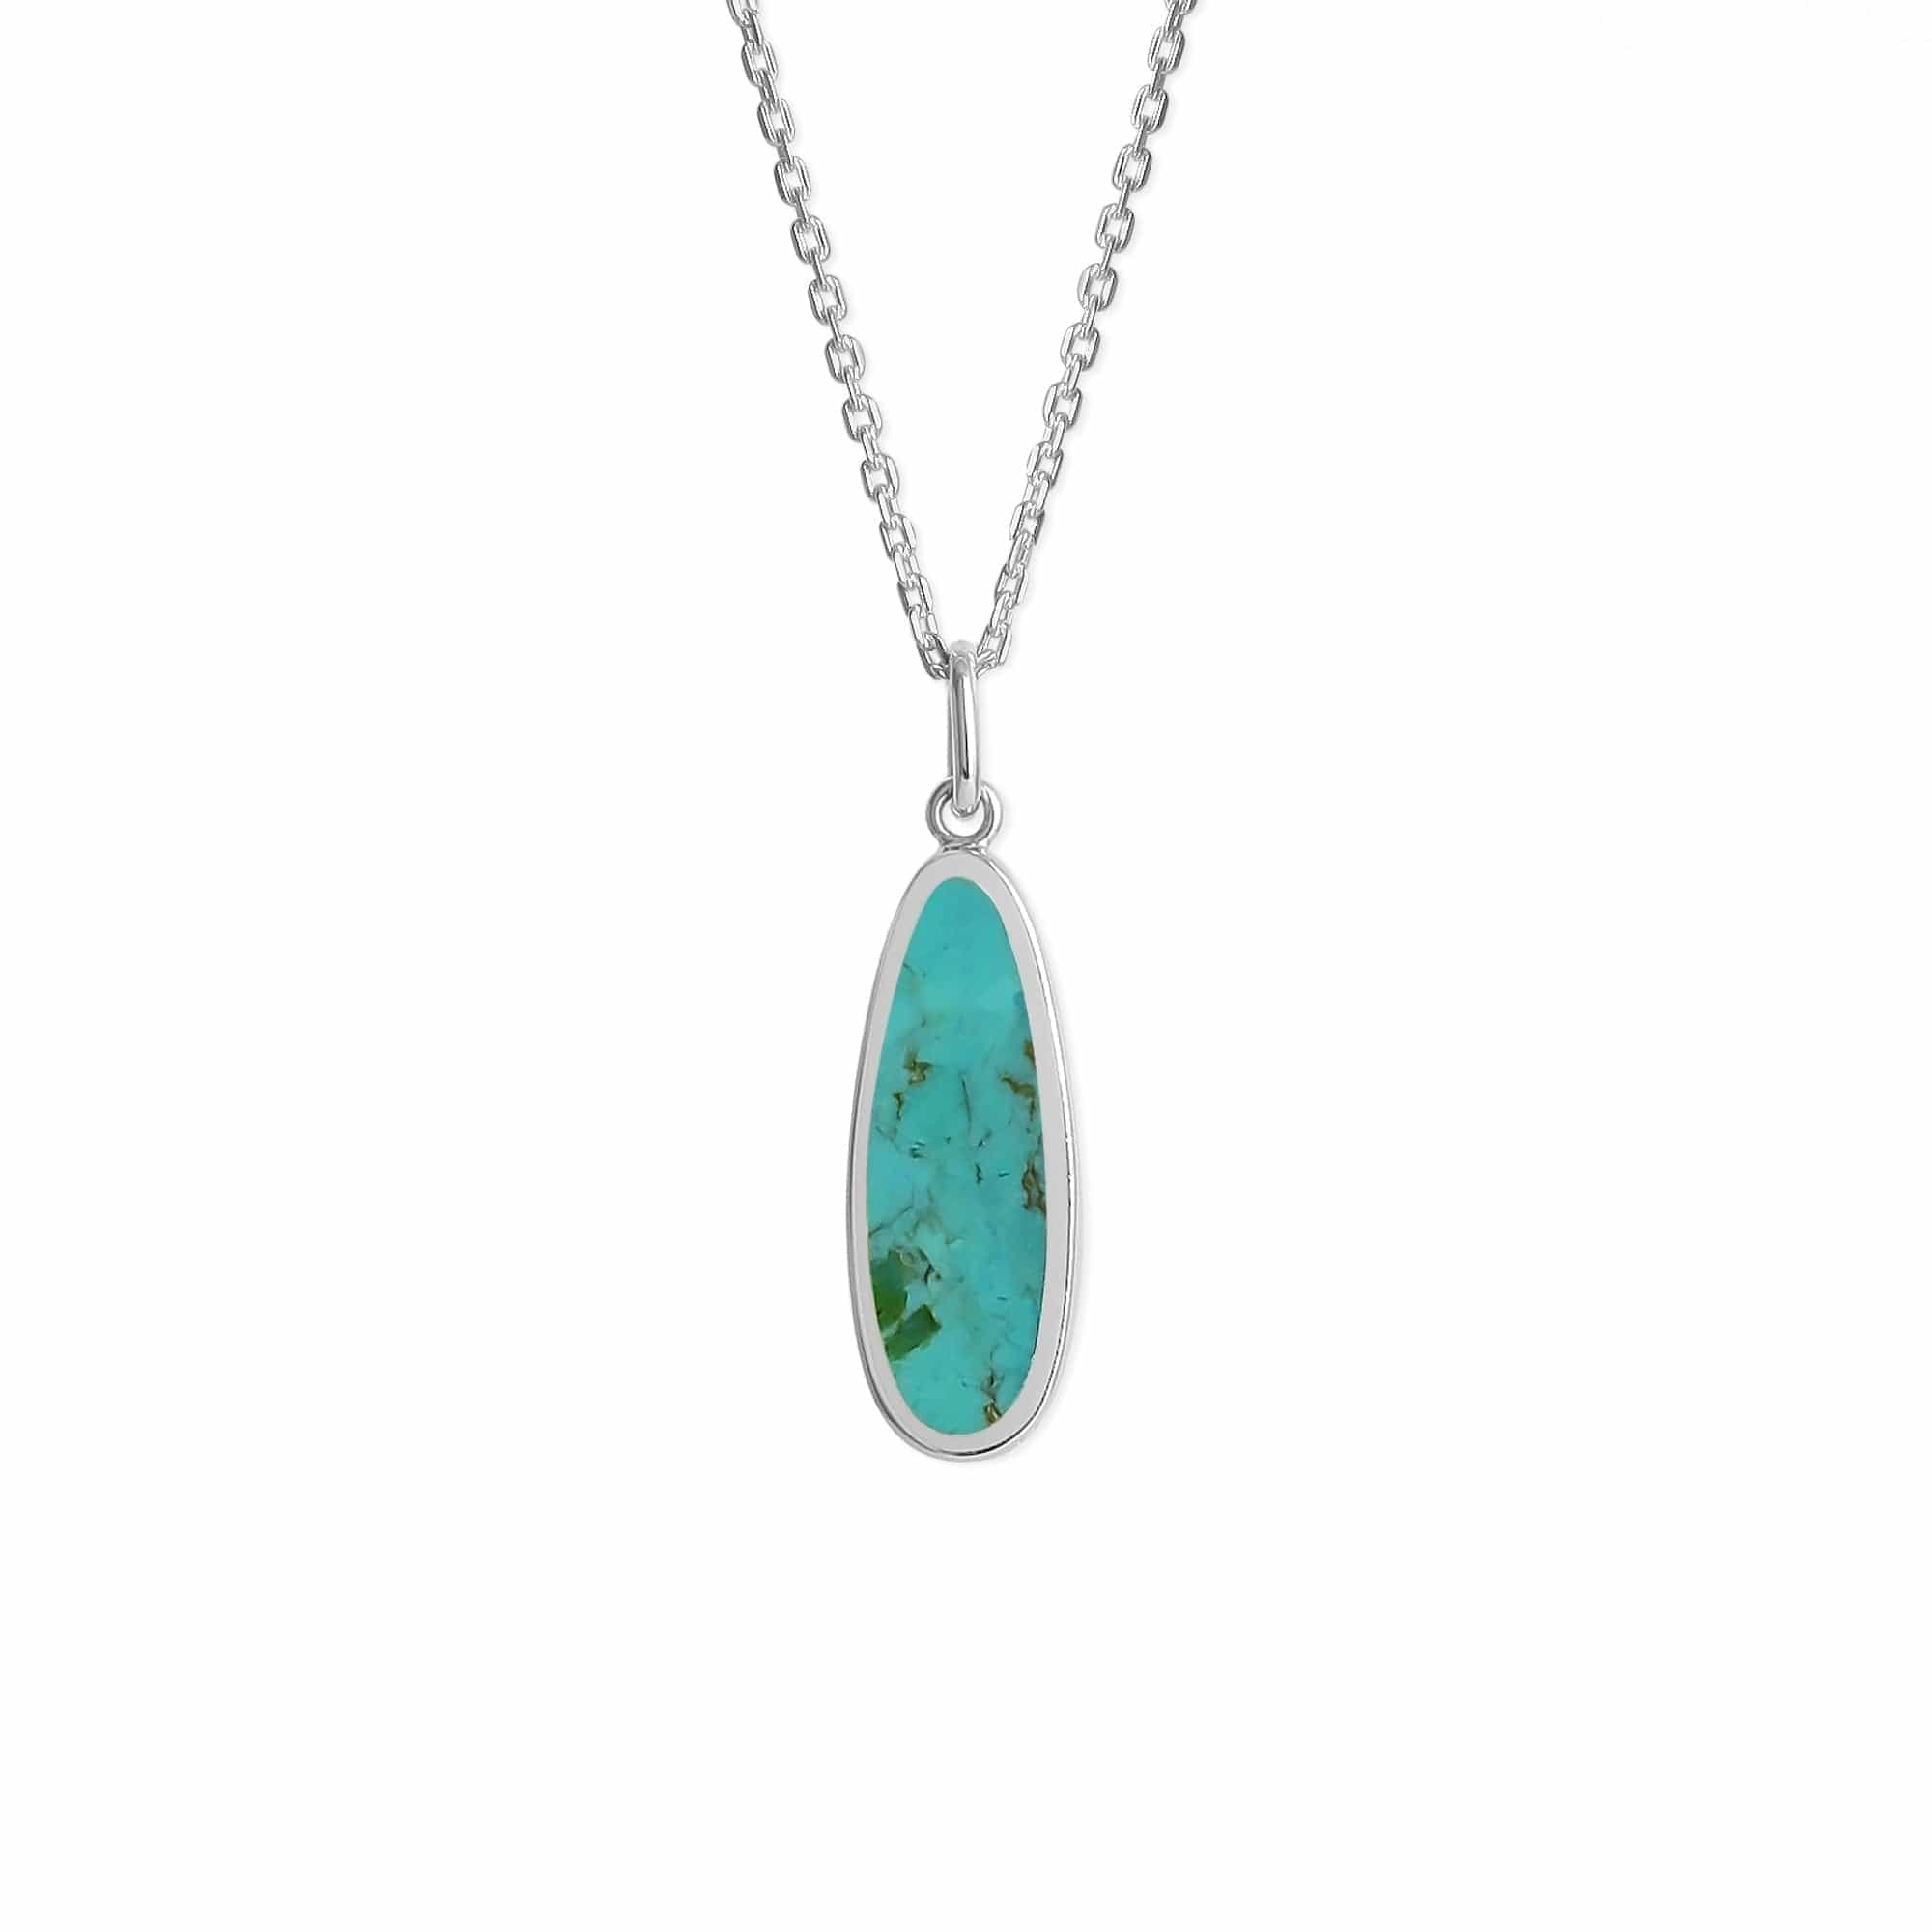 Boma Jewelry Necklaces Turquoise Alina Drop Bezel Necklace with Stone